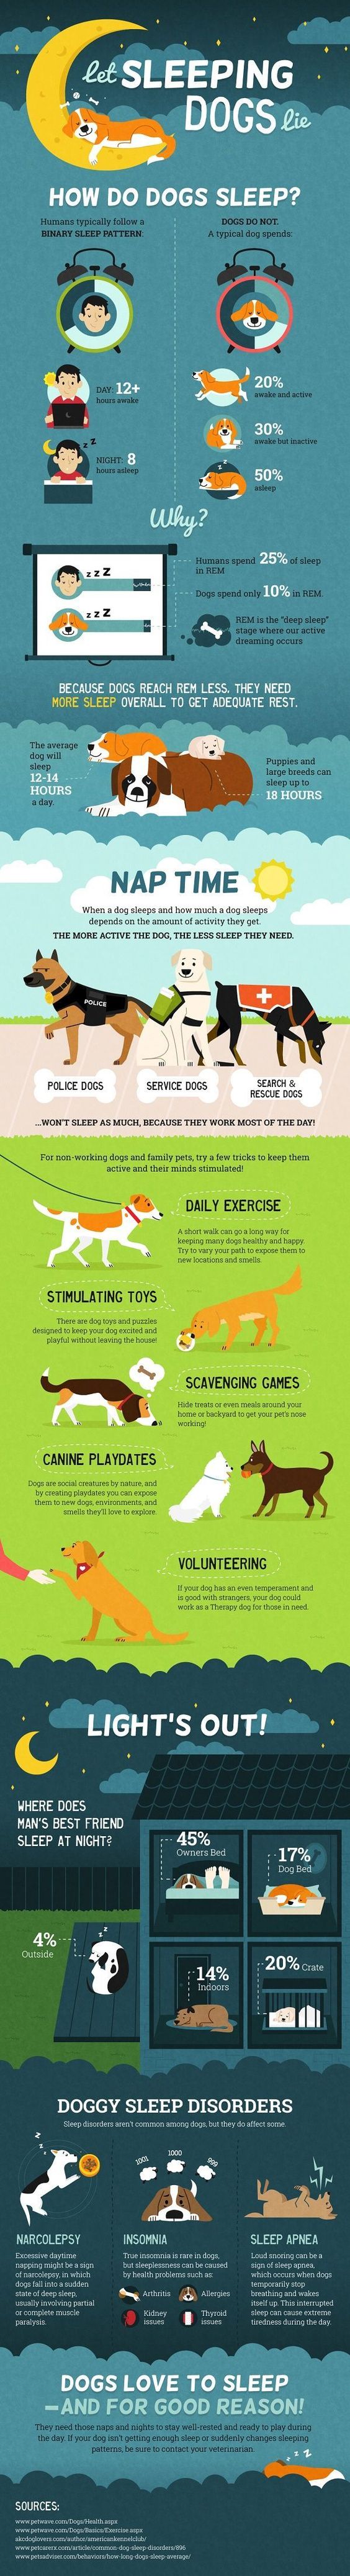 When a dog sleeps and how much a dog sleeps depends on the amount of activity they get. The more active the dog, the less sleep they need.